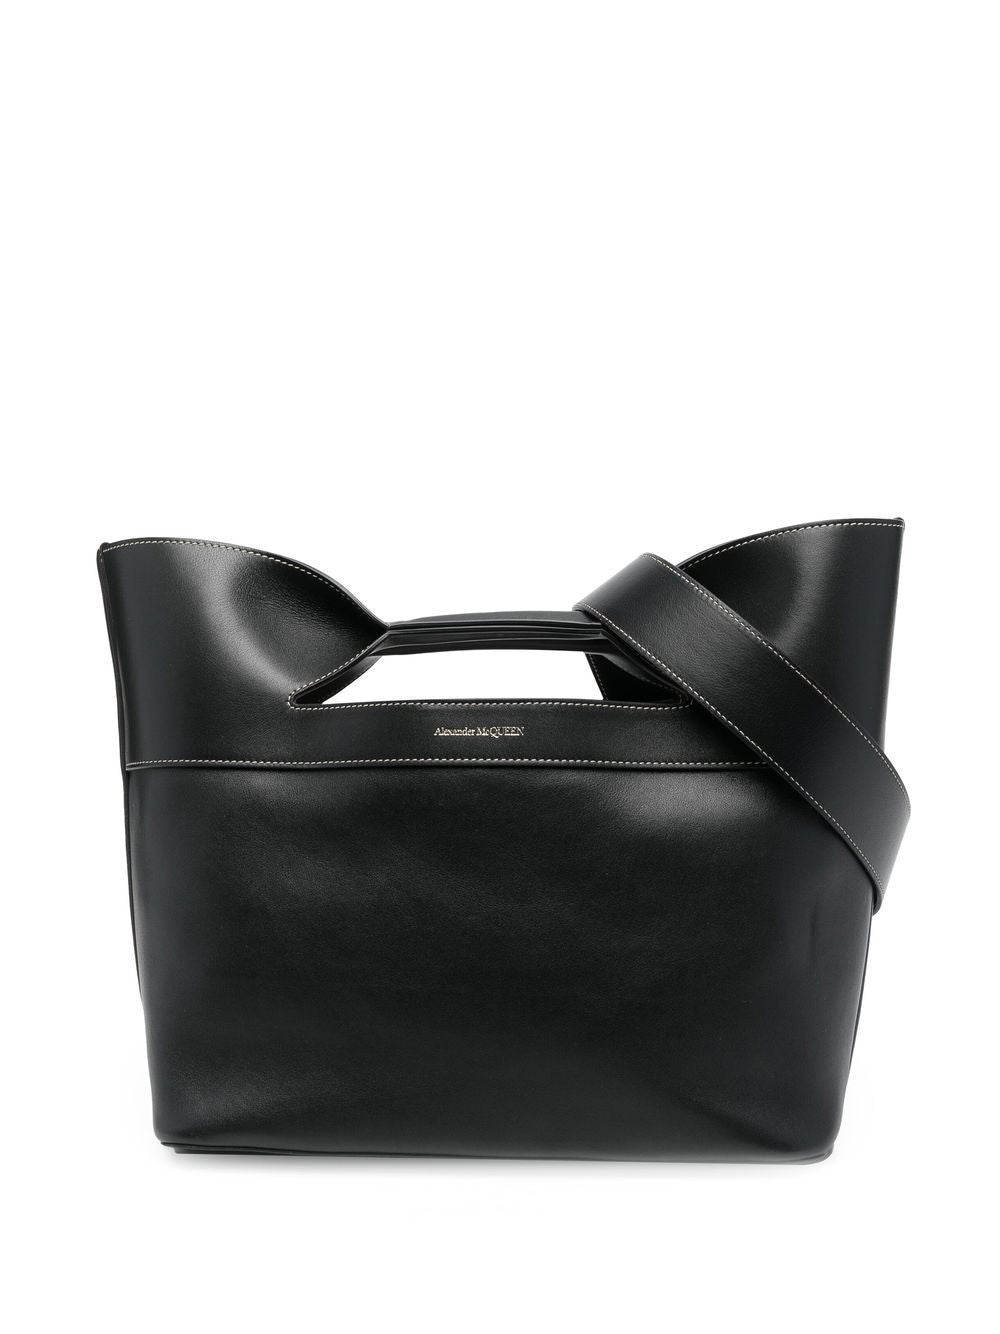 Shop Alexander Mcqueen Stylish And Versatile Black Leather Handbag For Women From Fw23 Collection In Tan